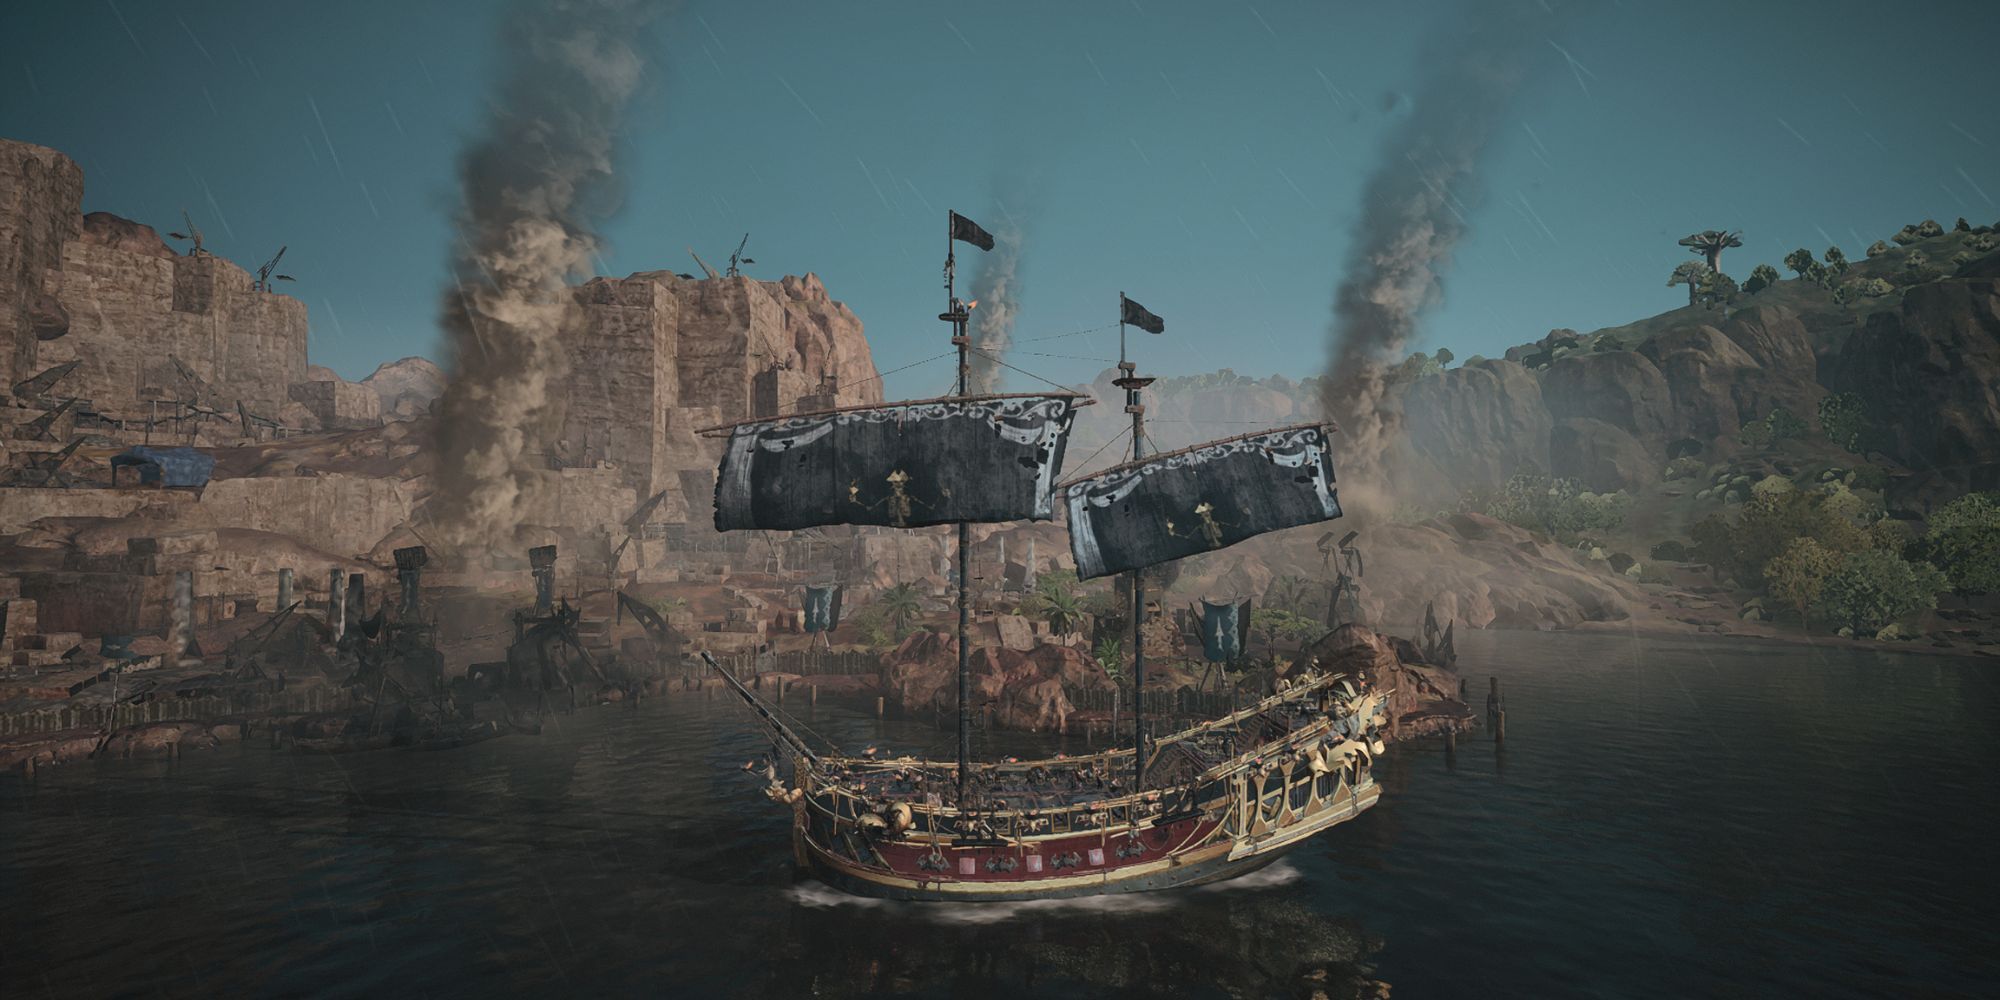 Skull And Bones Ship Standing In Front Of Plundered Outpost